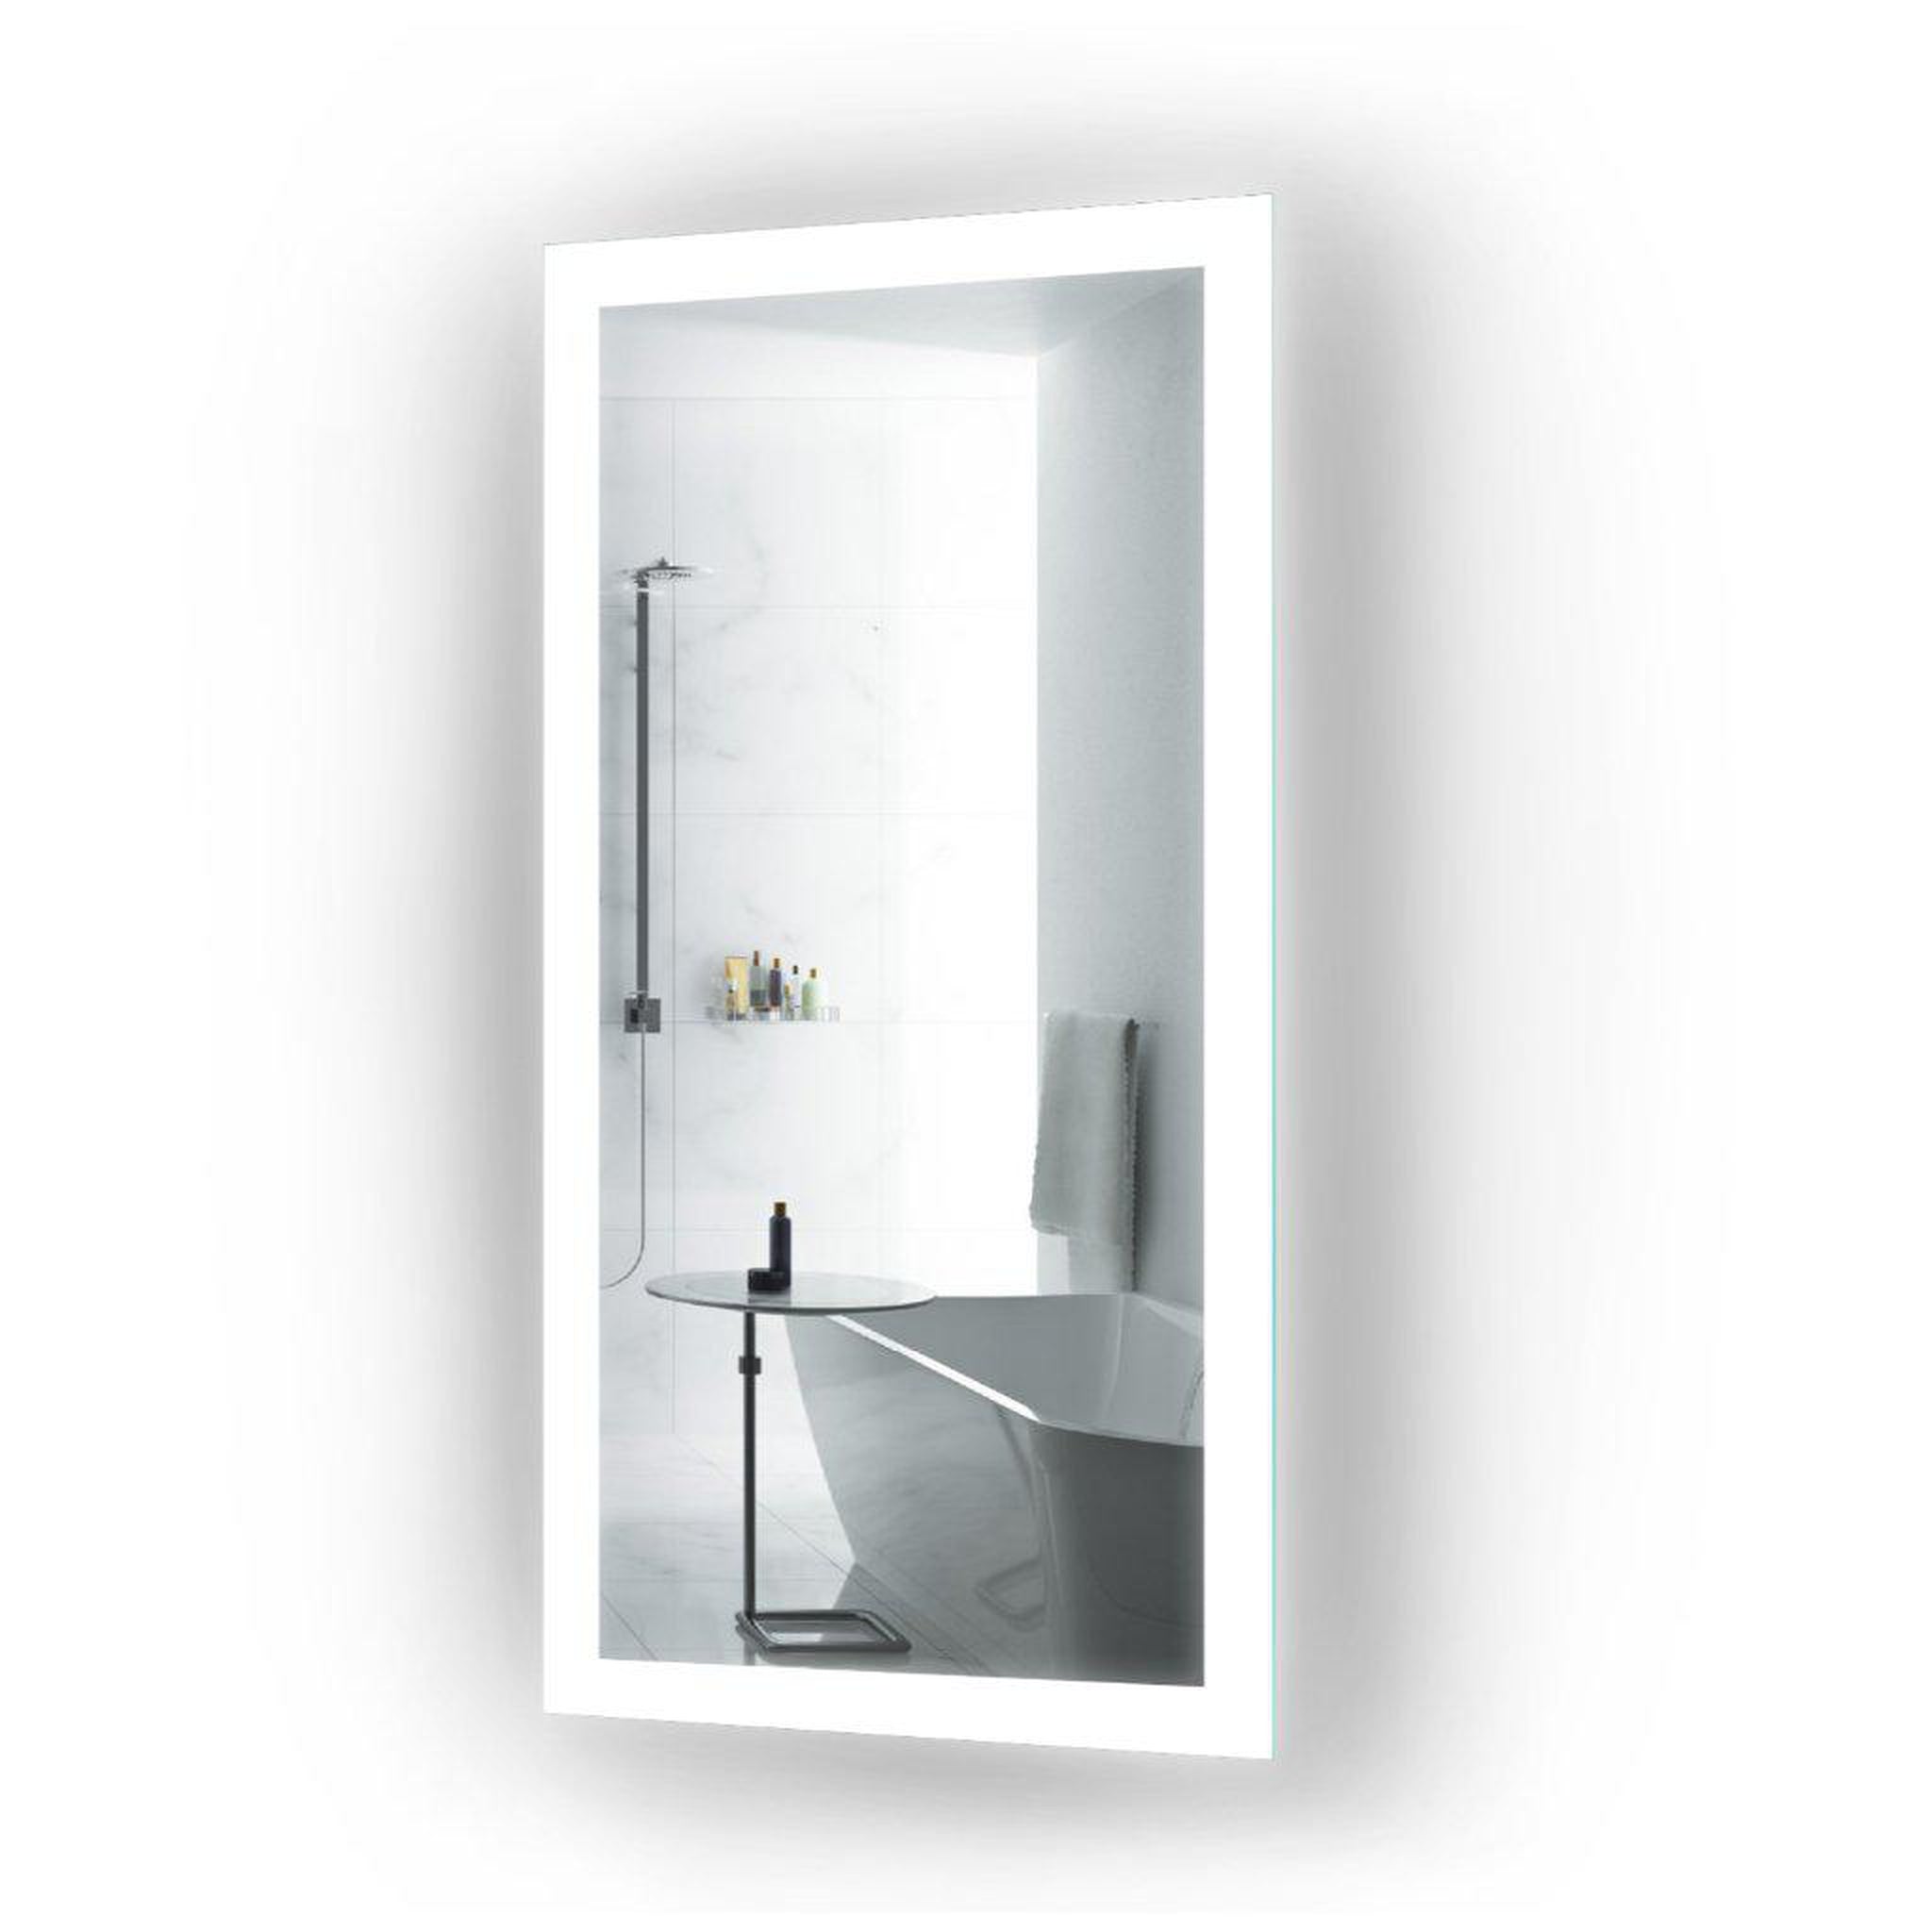 Krugg Reflections, Krugg Reflections Bijou 15" x 30" Small Rectangular Wall-Mounted 5000K LED Bathroom Vanity Mirror With Built-in Defogger and Dimmer